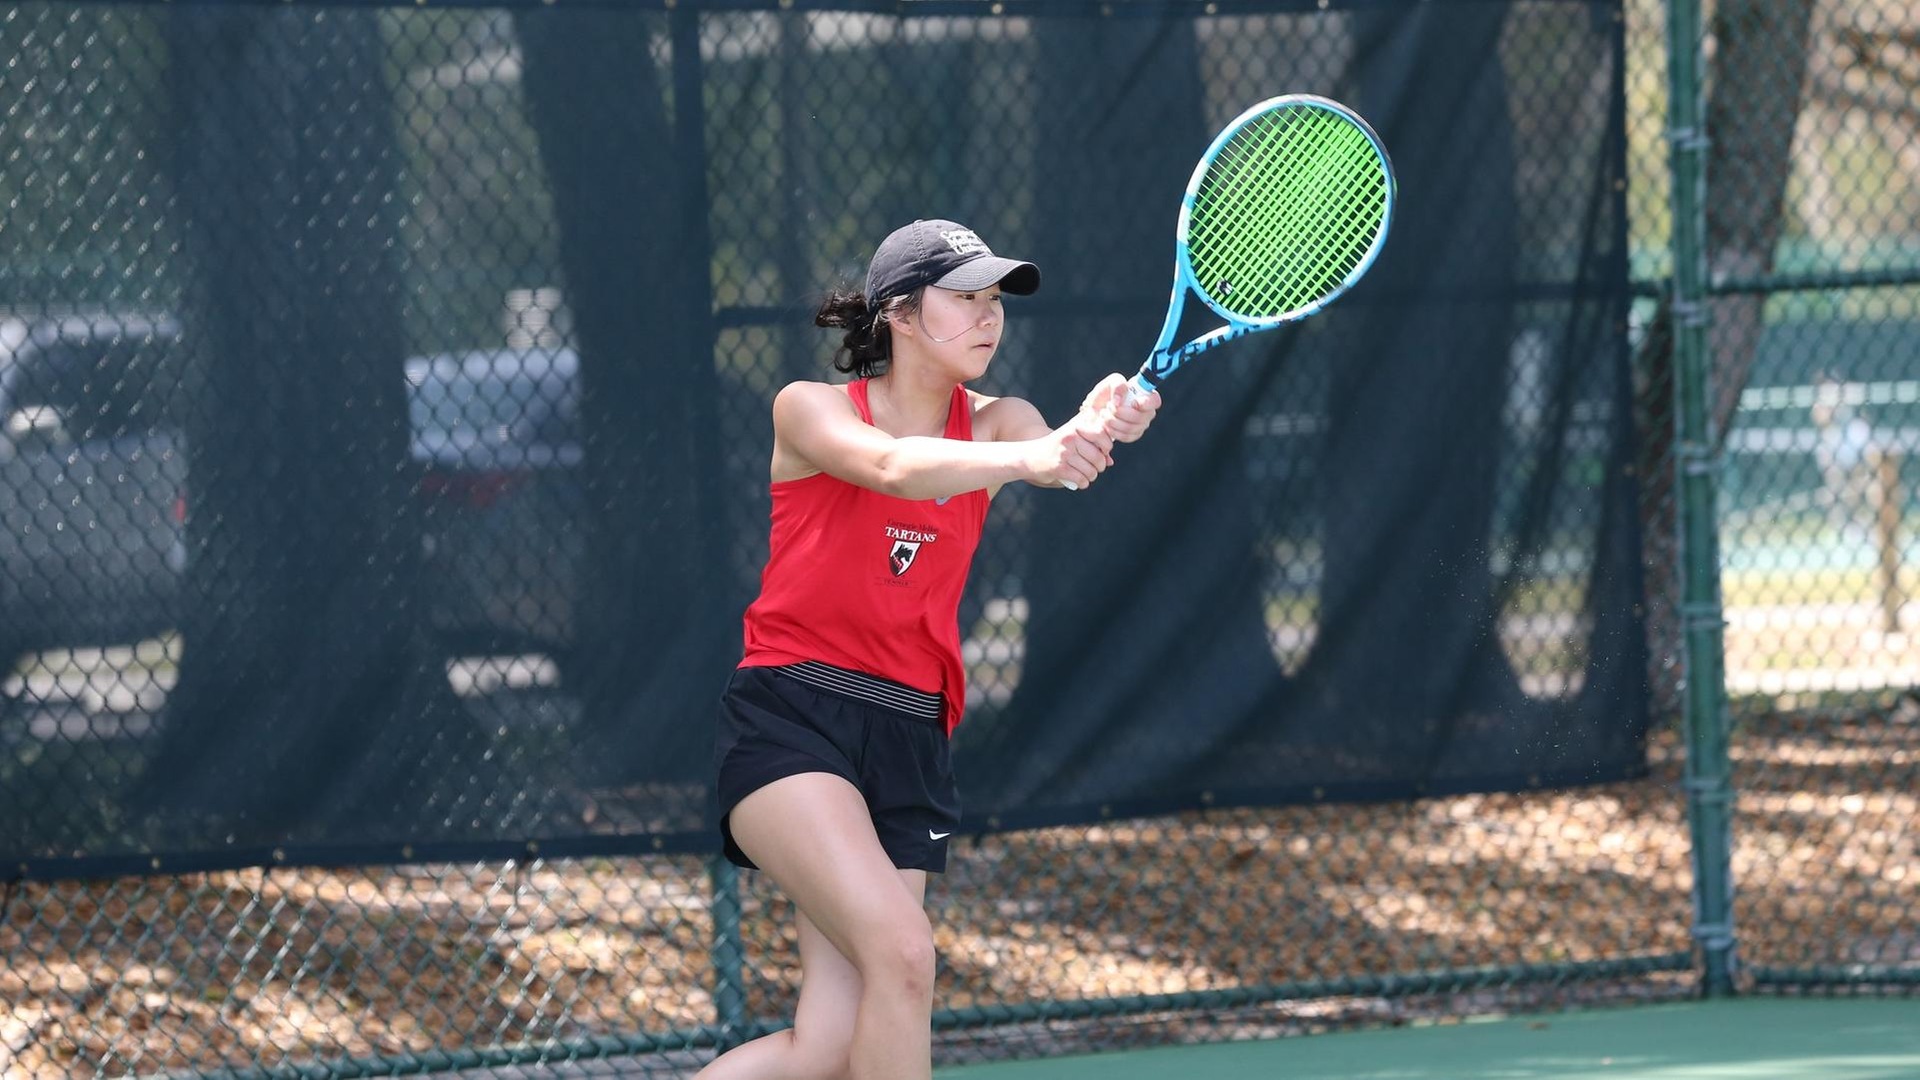 women's tennis player wearing red top and black shorts swinging the racquet